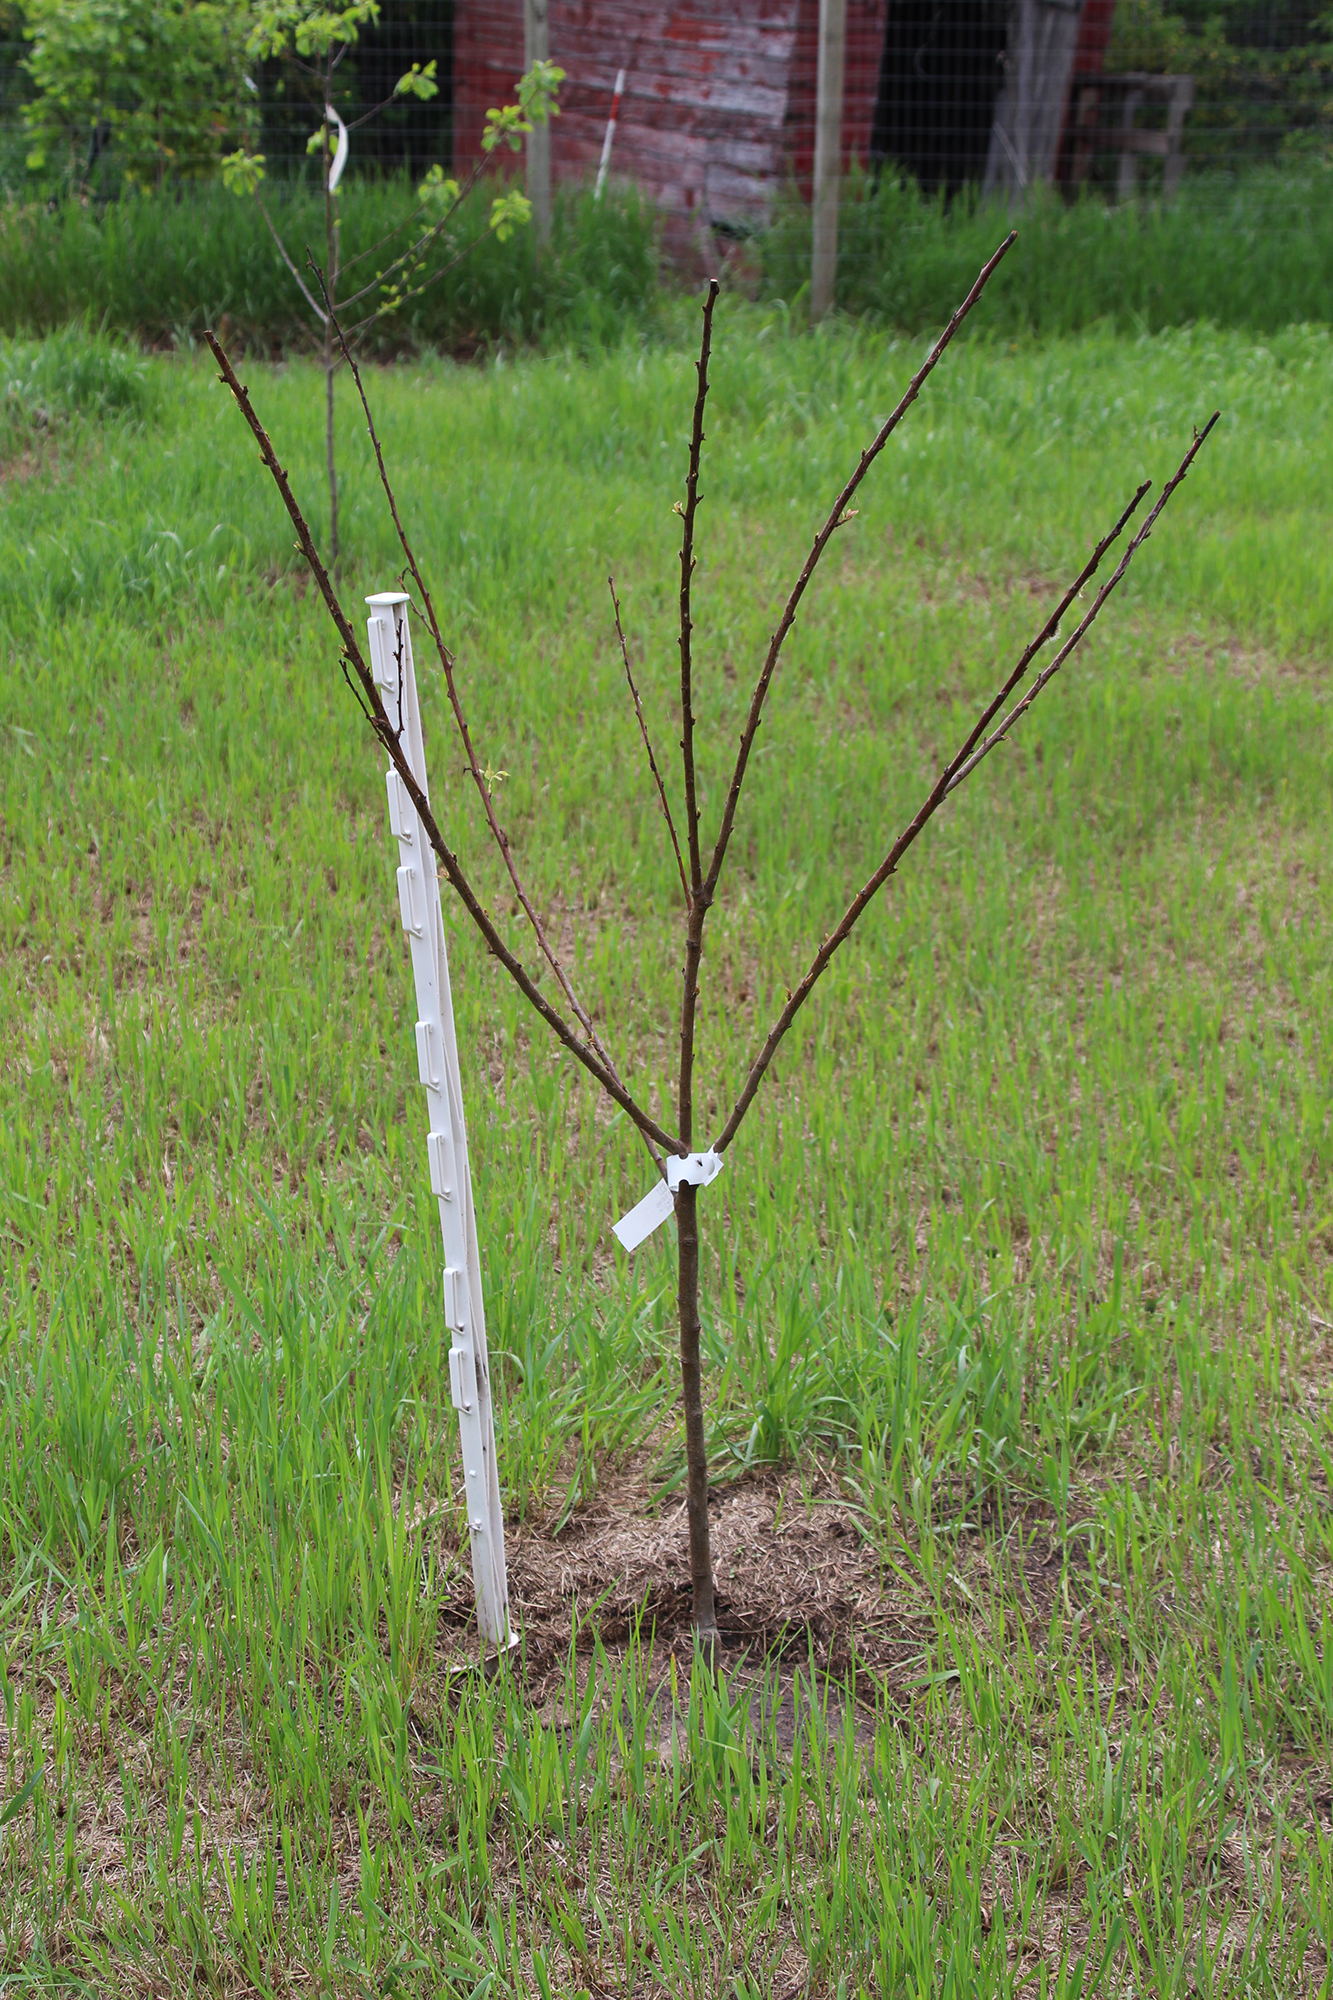 A newly planted bare root fruit tree that has not leafed out yet